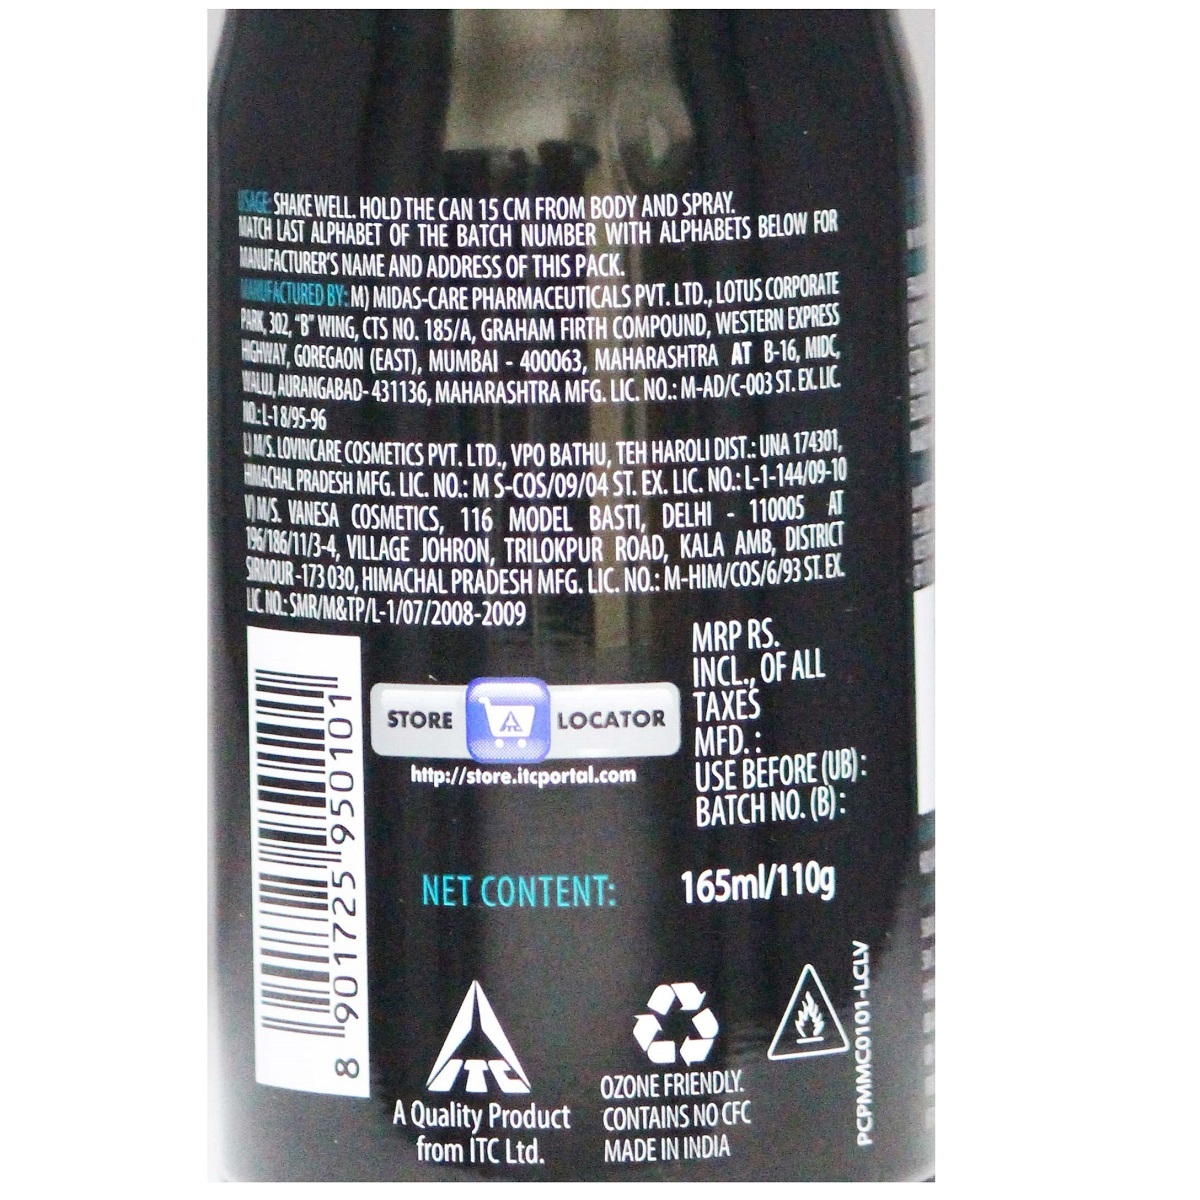 Engage Mens Deo Mate 165ml